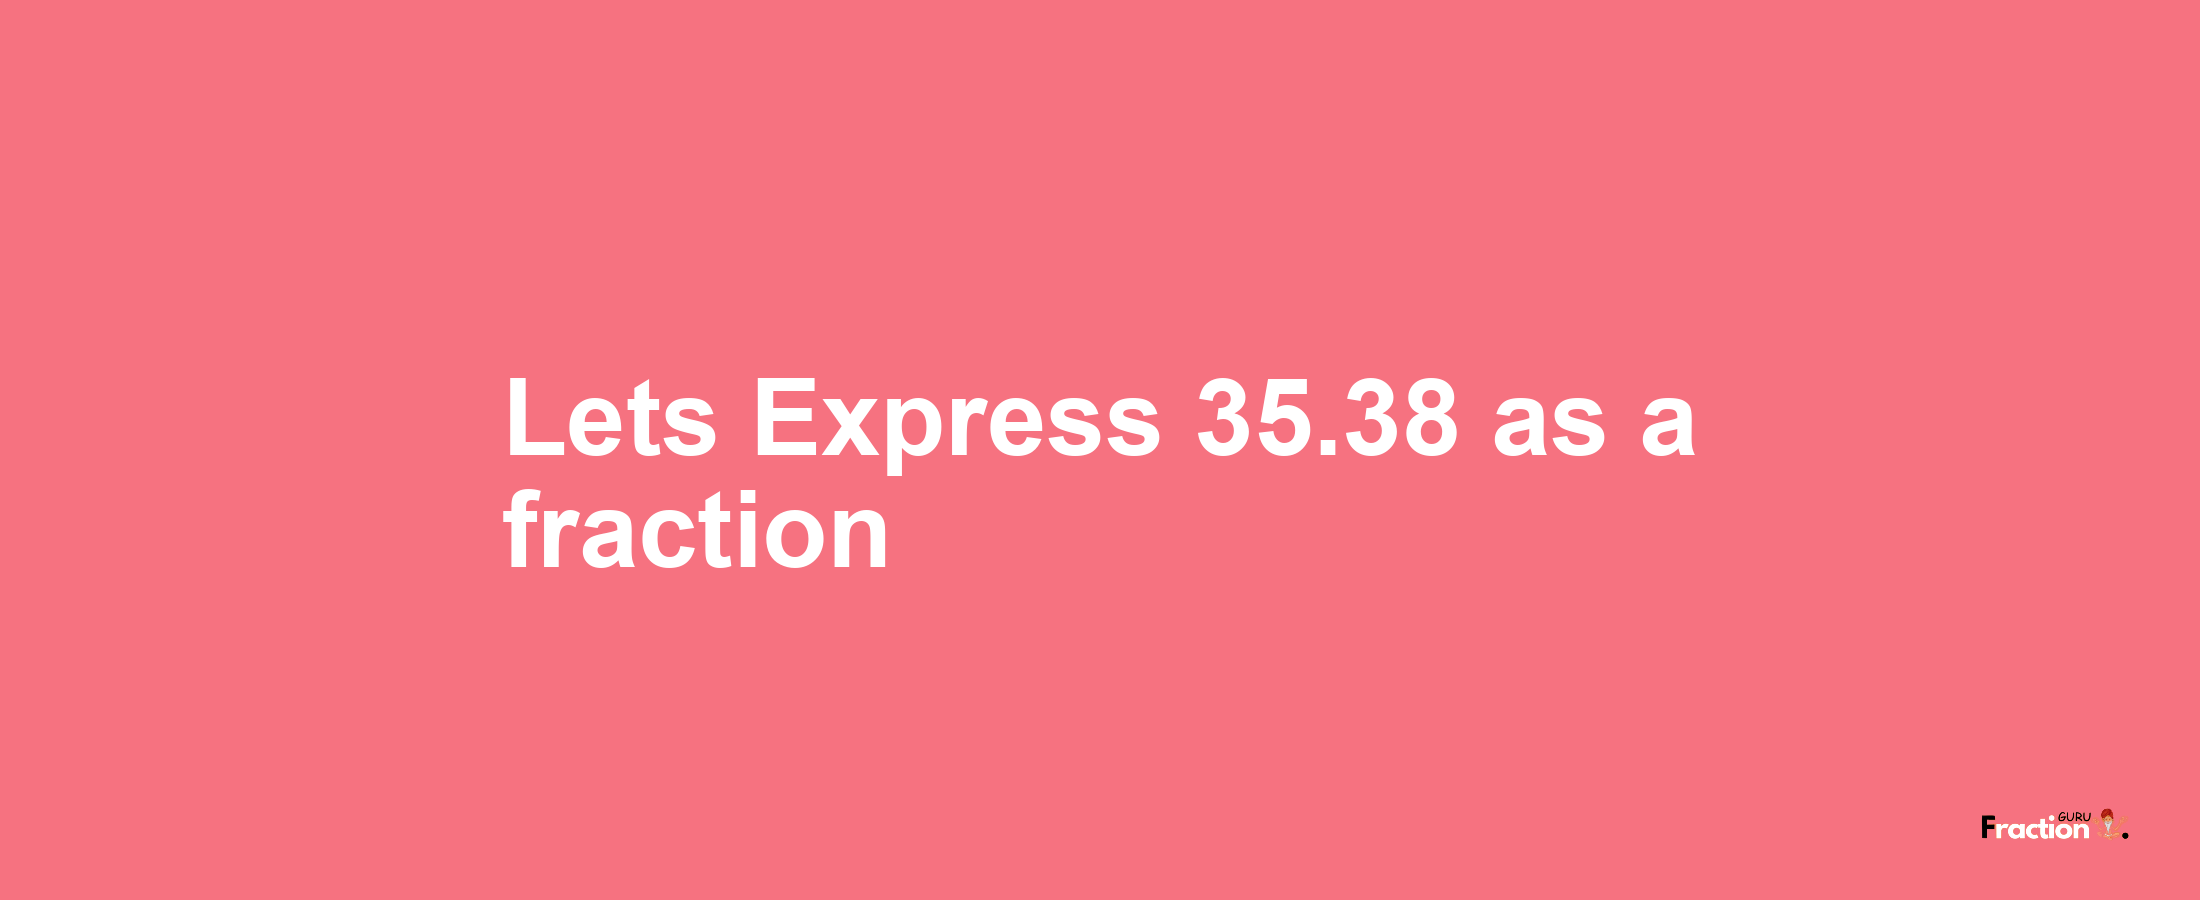 Lets Express 35.38 as afraction